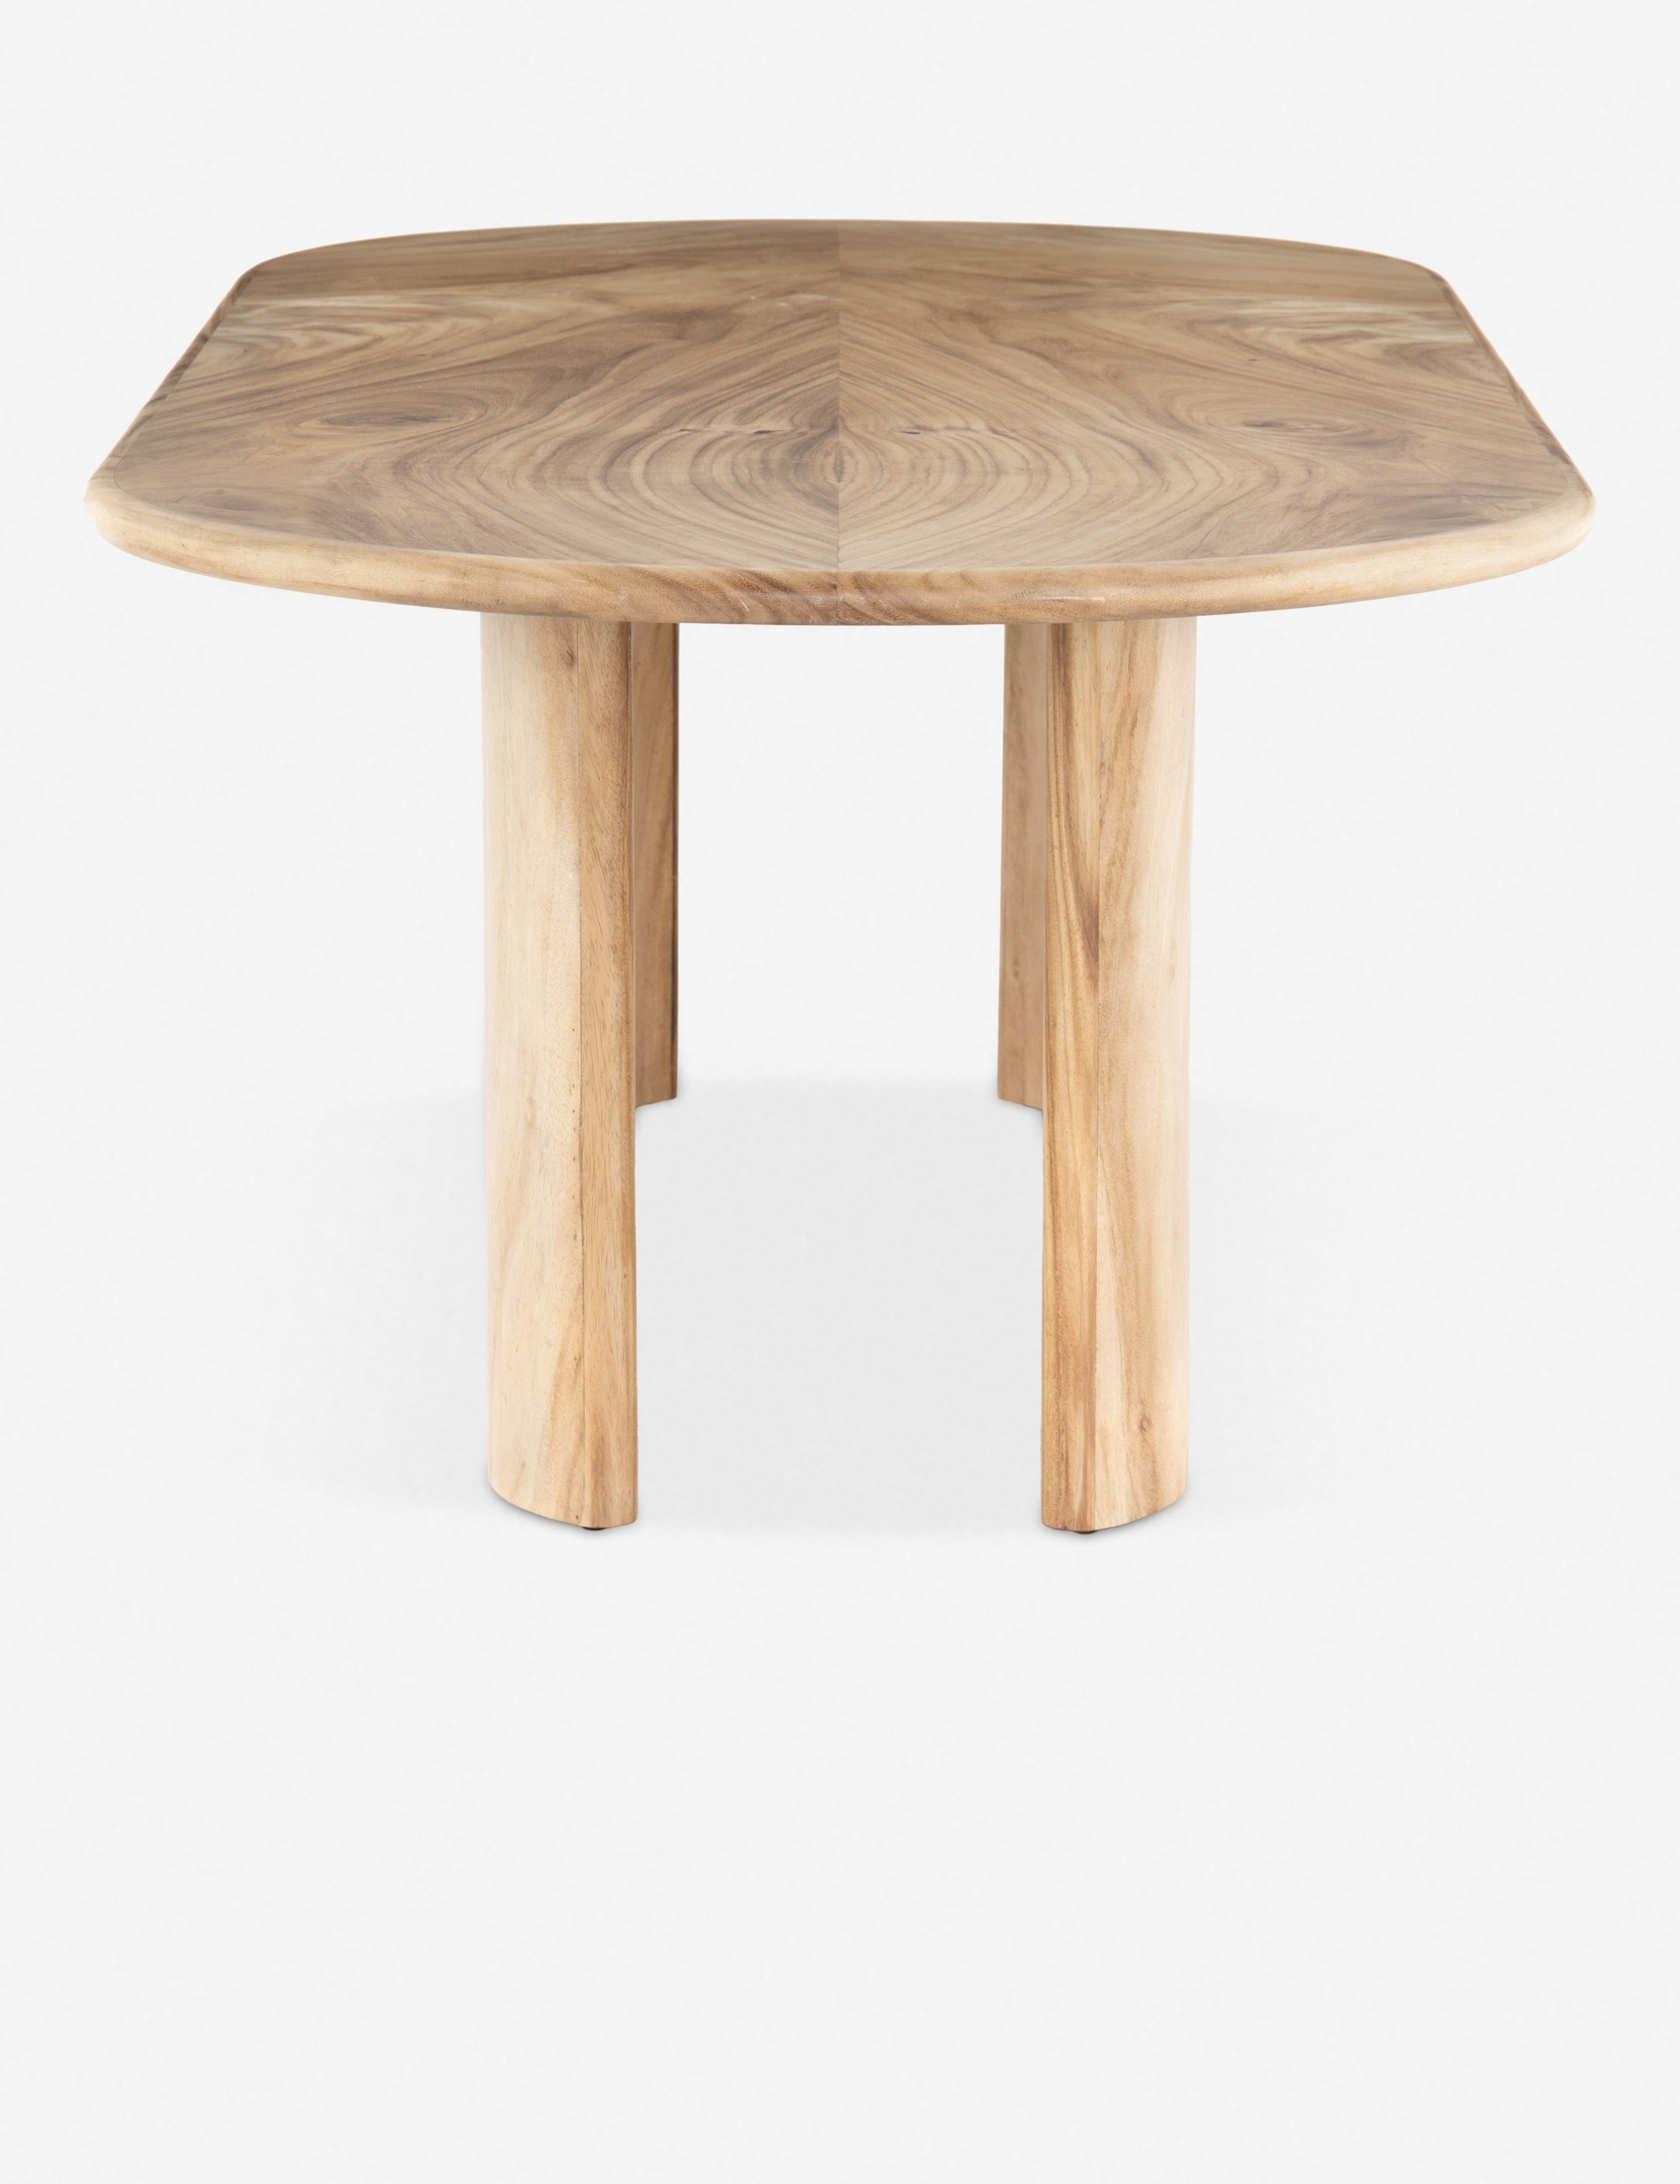 Nausica Oval Dining Table - Image 2